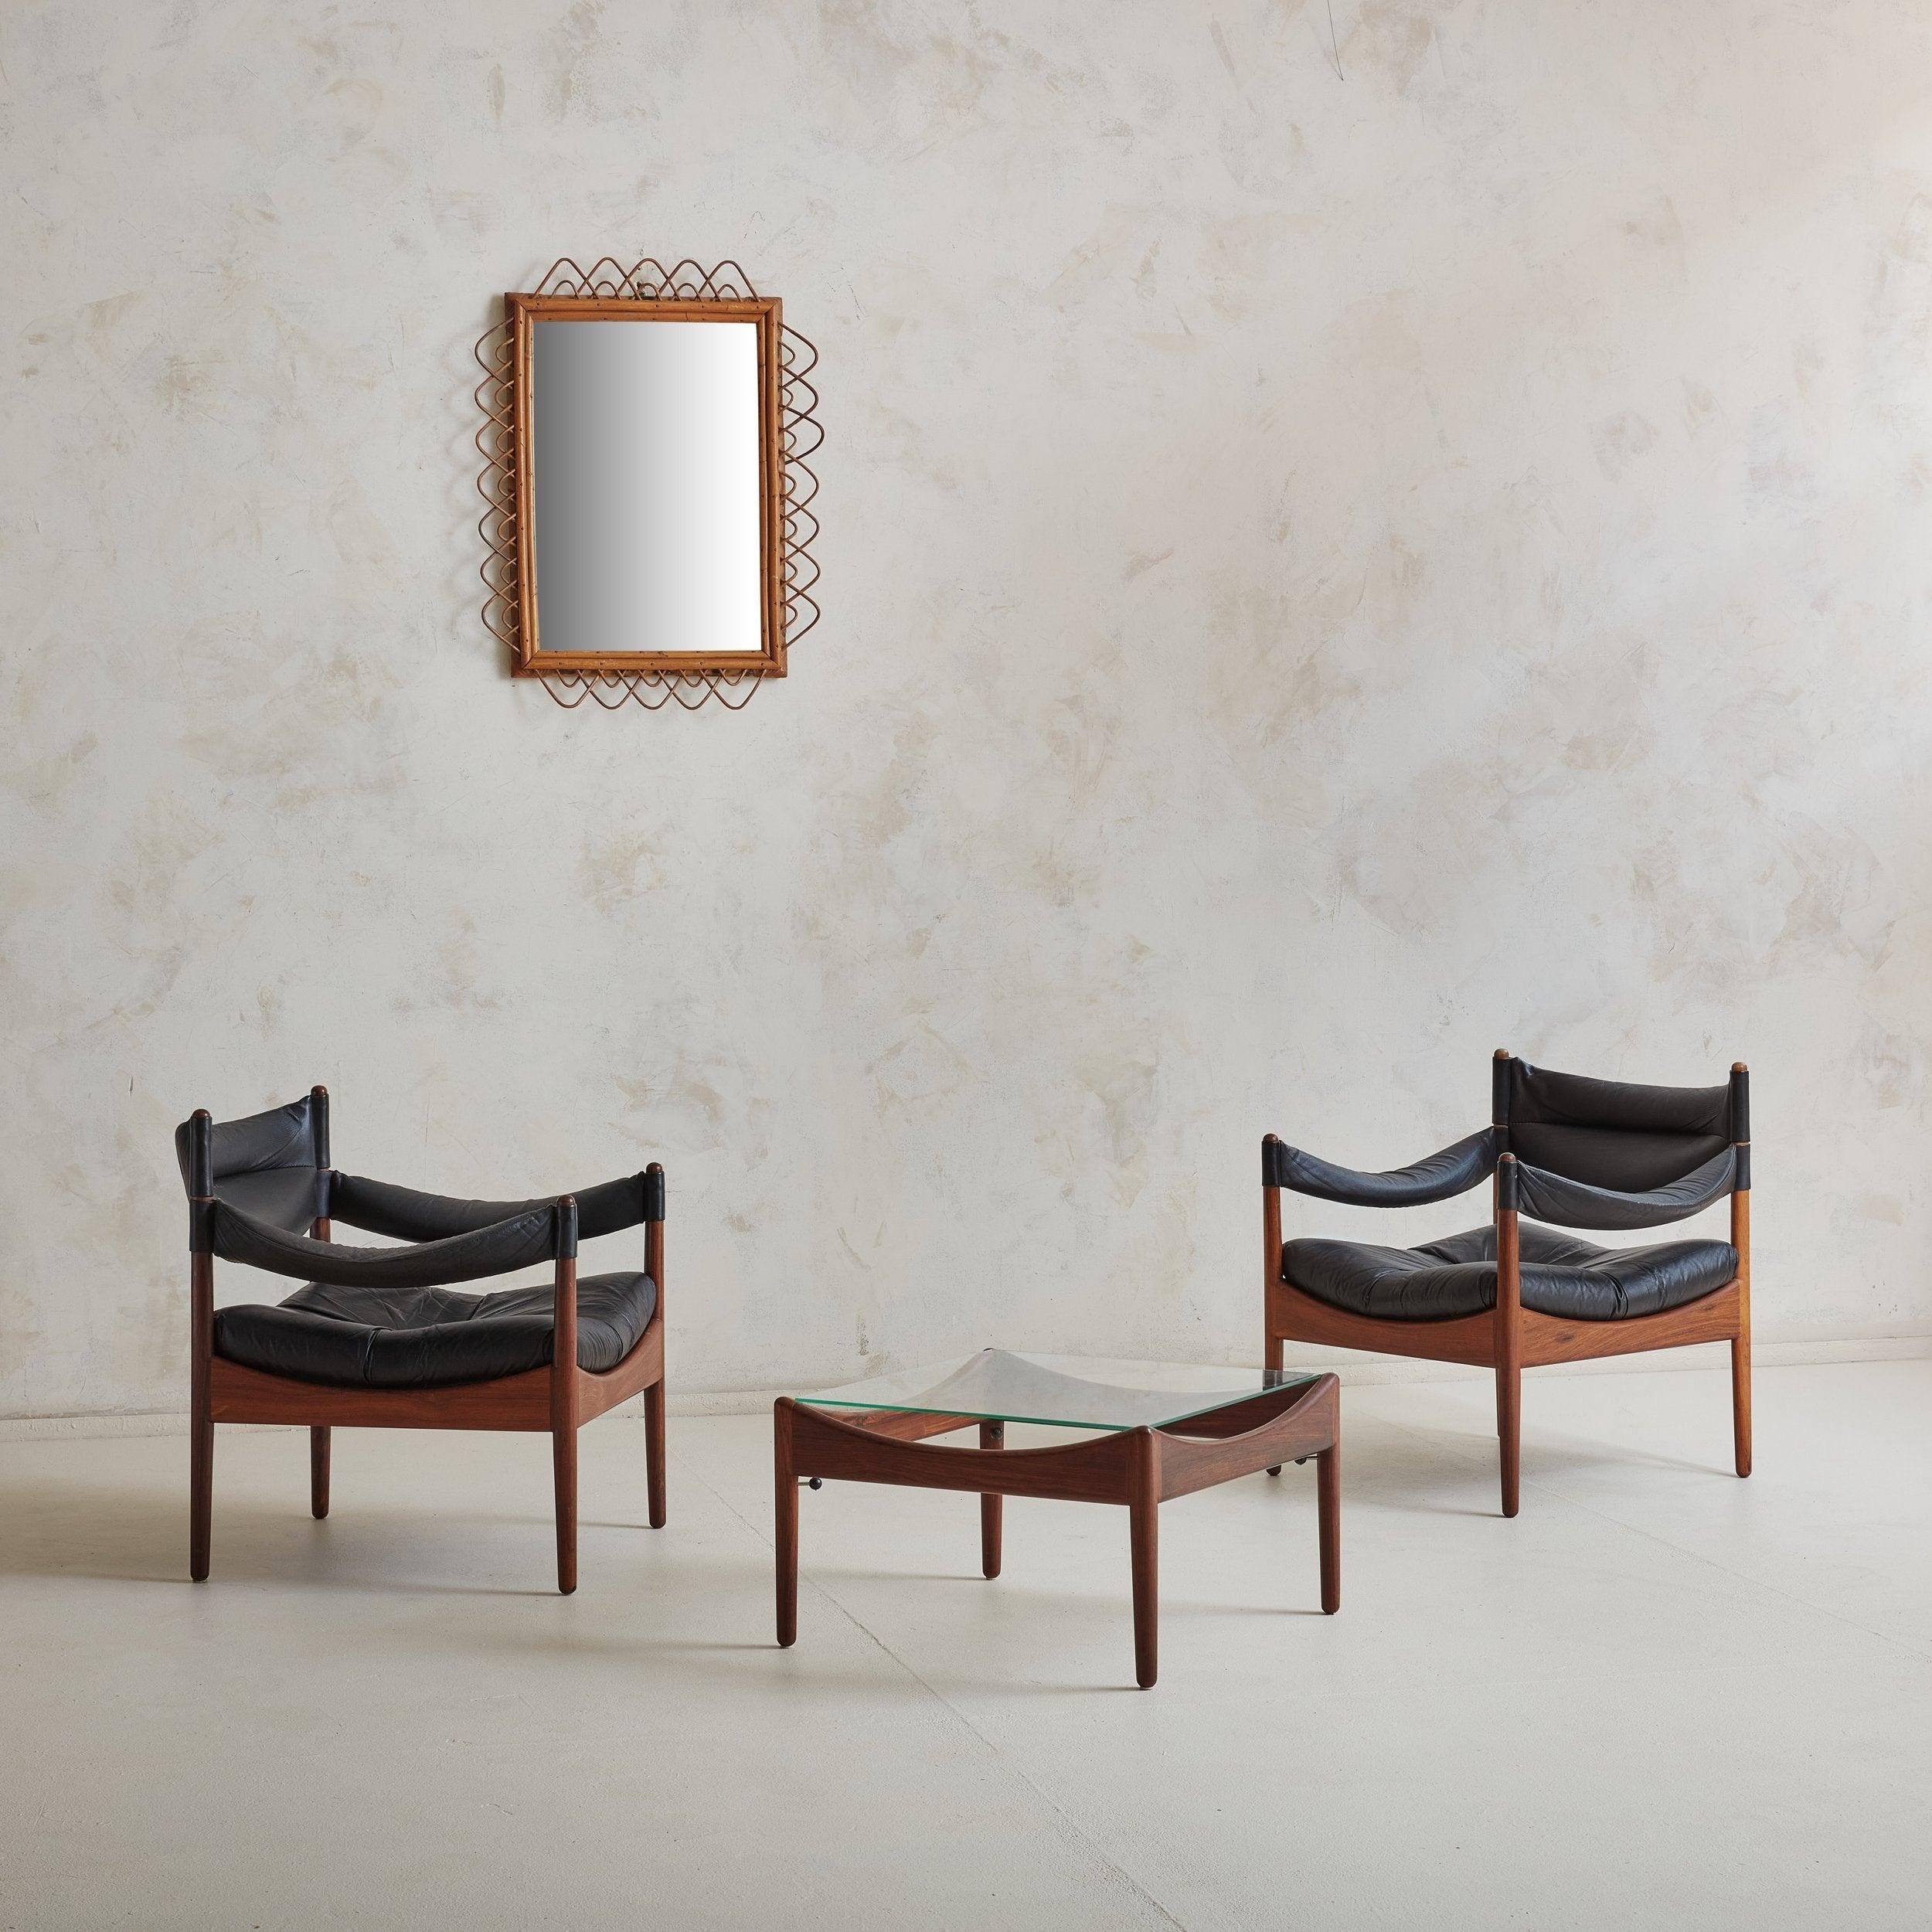 Set of 2 Danish Modern black leather armchairs and matching table from the Modus series, designed by Kristian Vedel for Willadsen Møbelfabrik. This 1960s Scandinavian Modern set features gorgeous rosewood frames with curved details and minimalistic